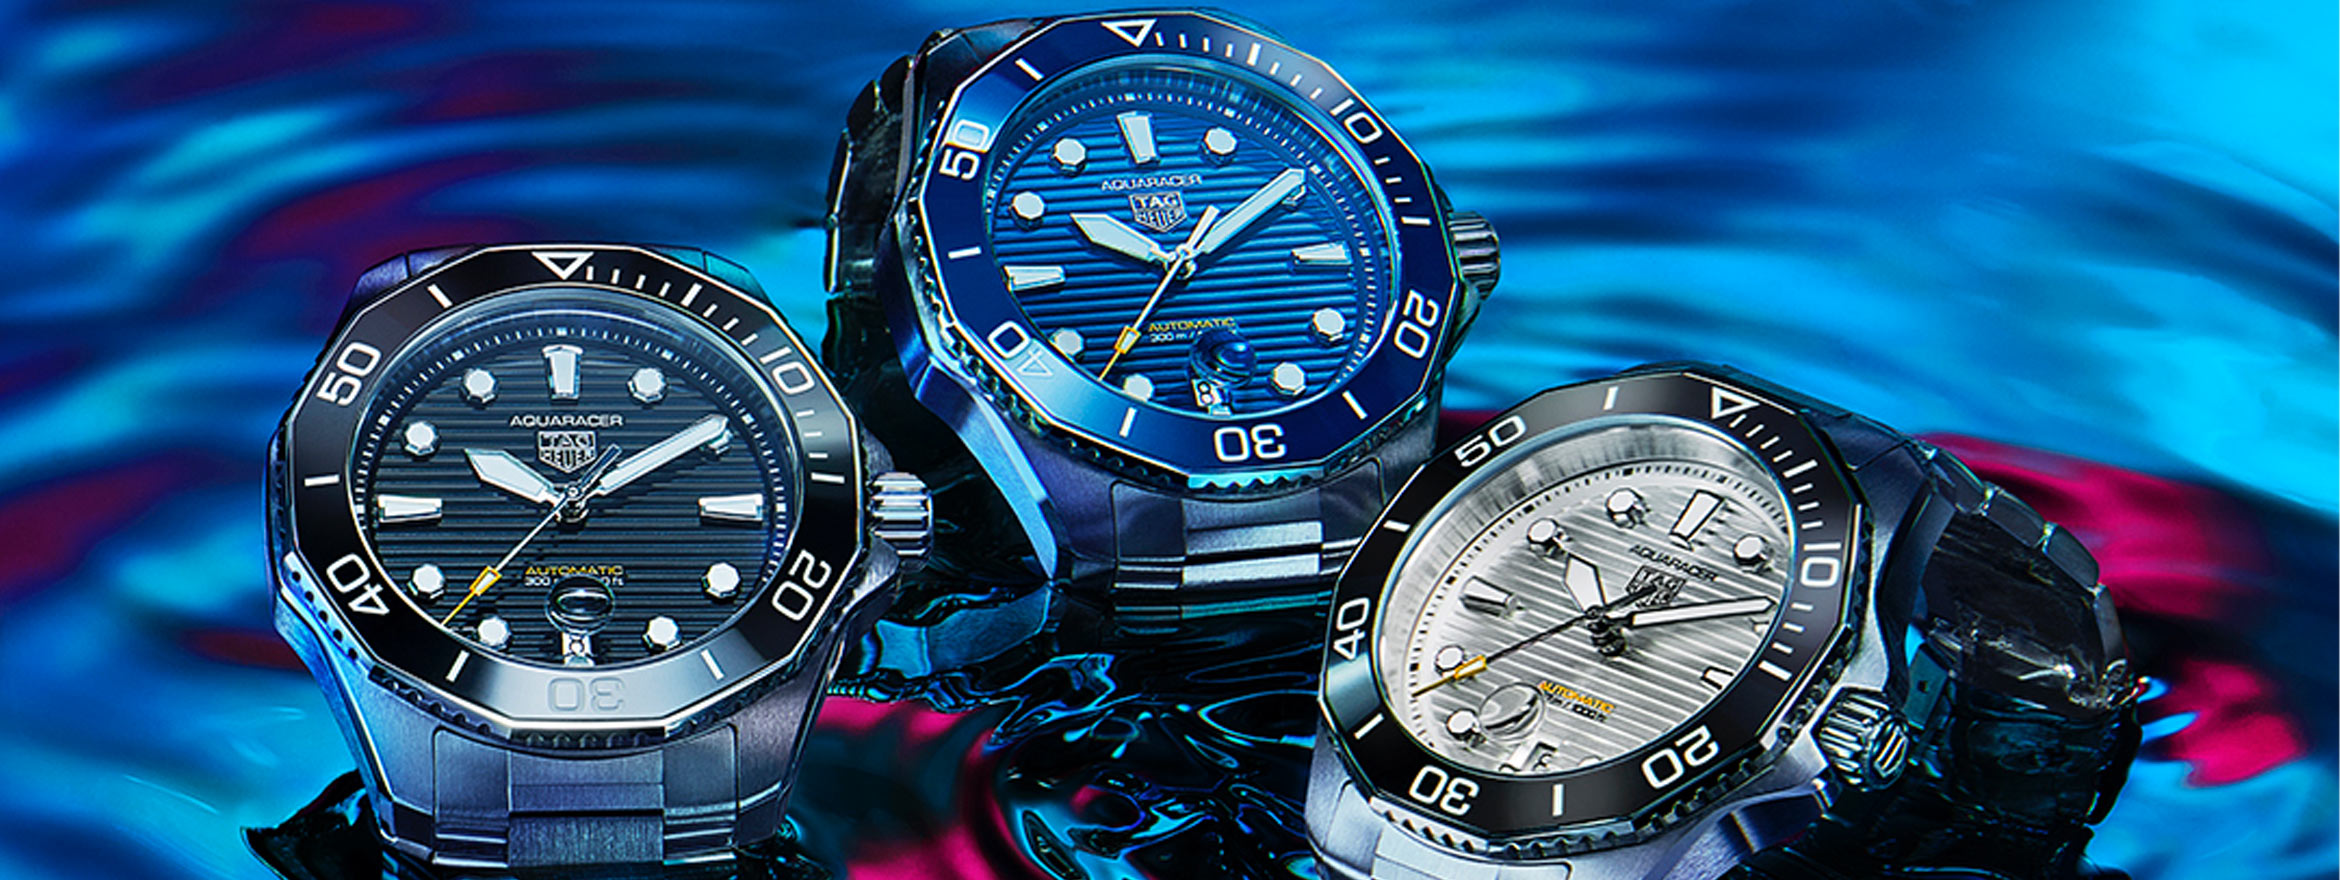 The Rebirth of the TAG Heuer Aquaracer